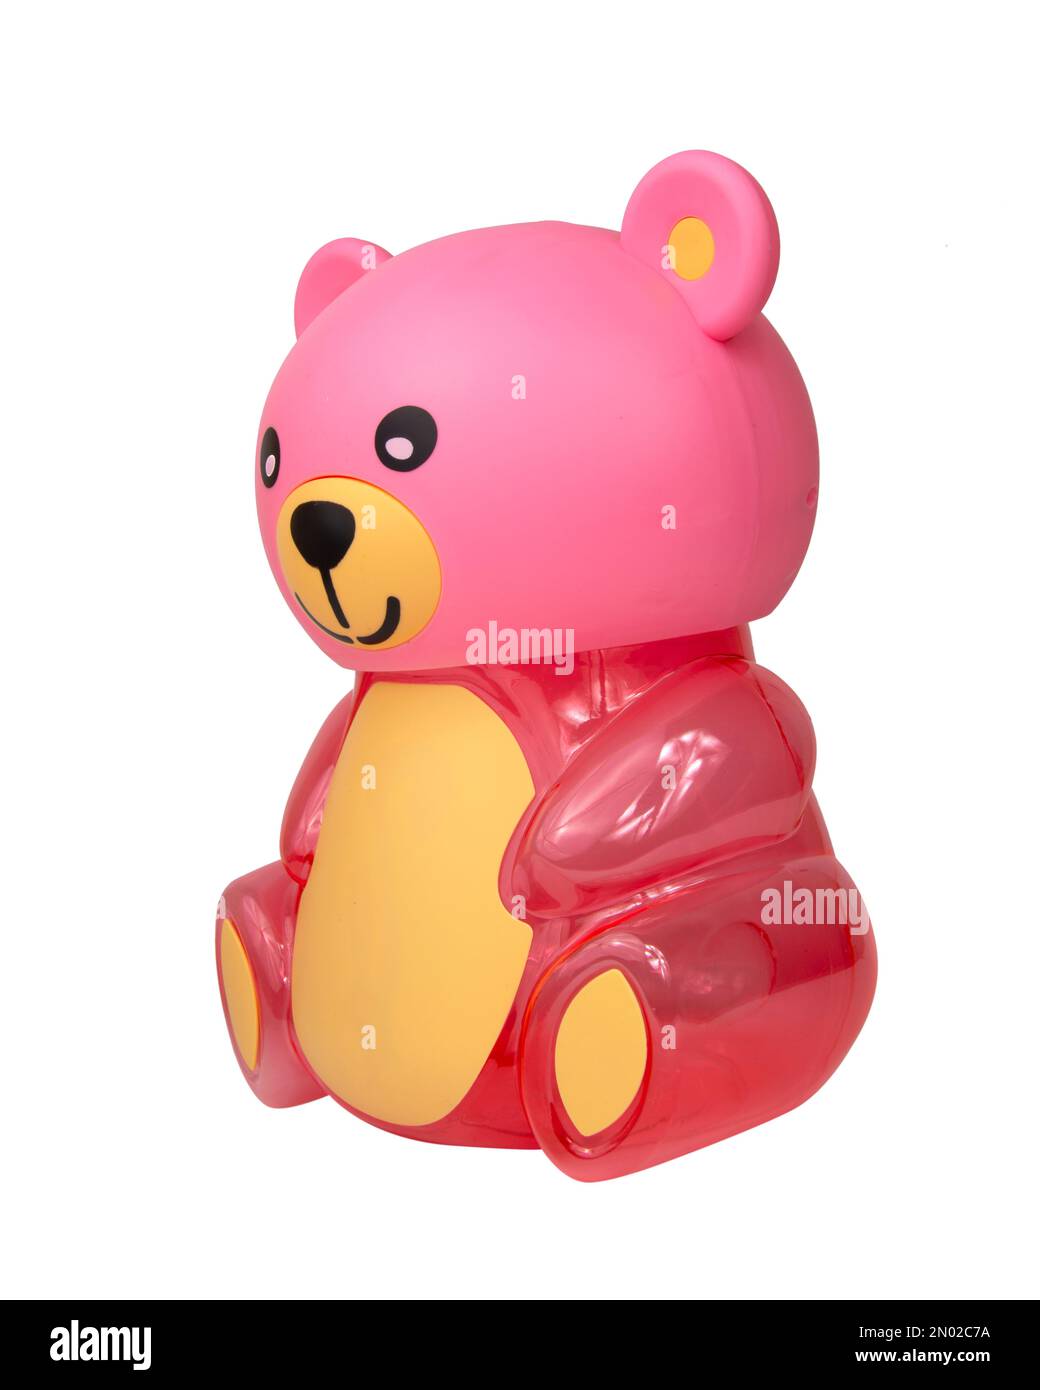 Pink toy bear plastic gift baby isolated on the white background Stock Photo